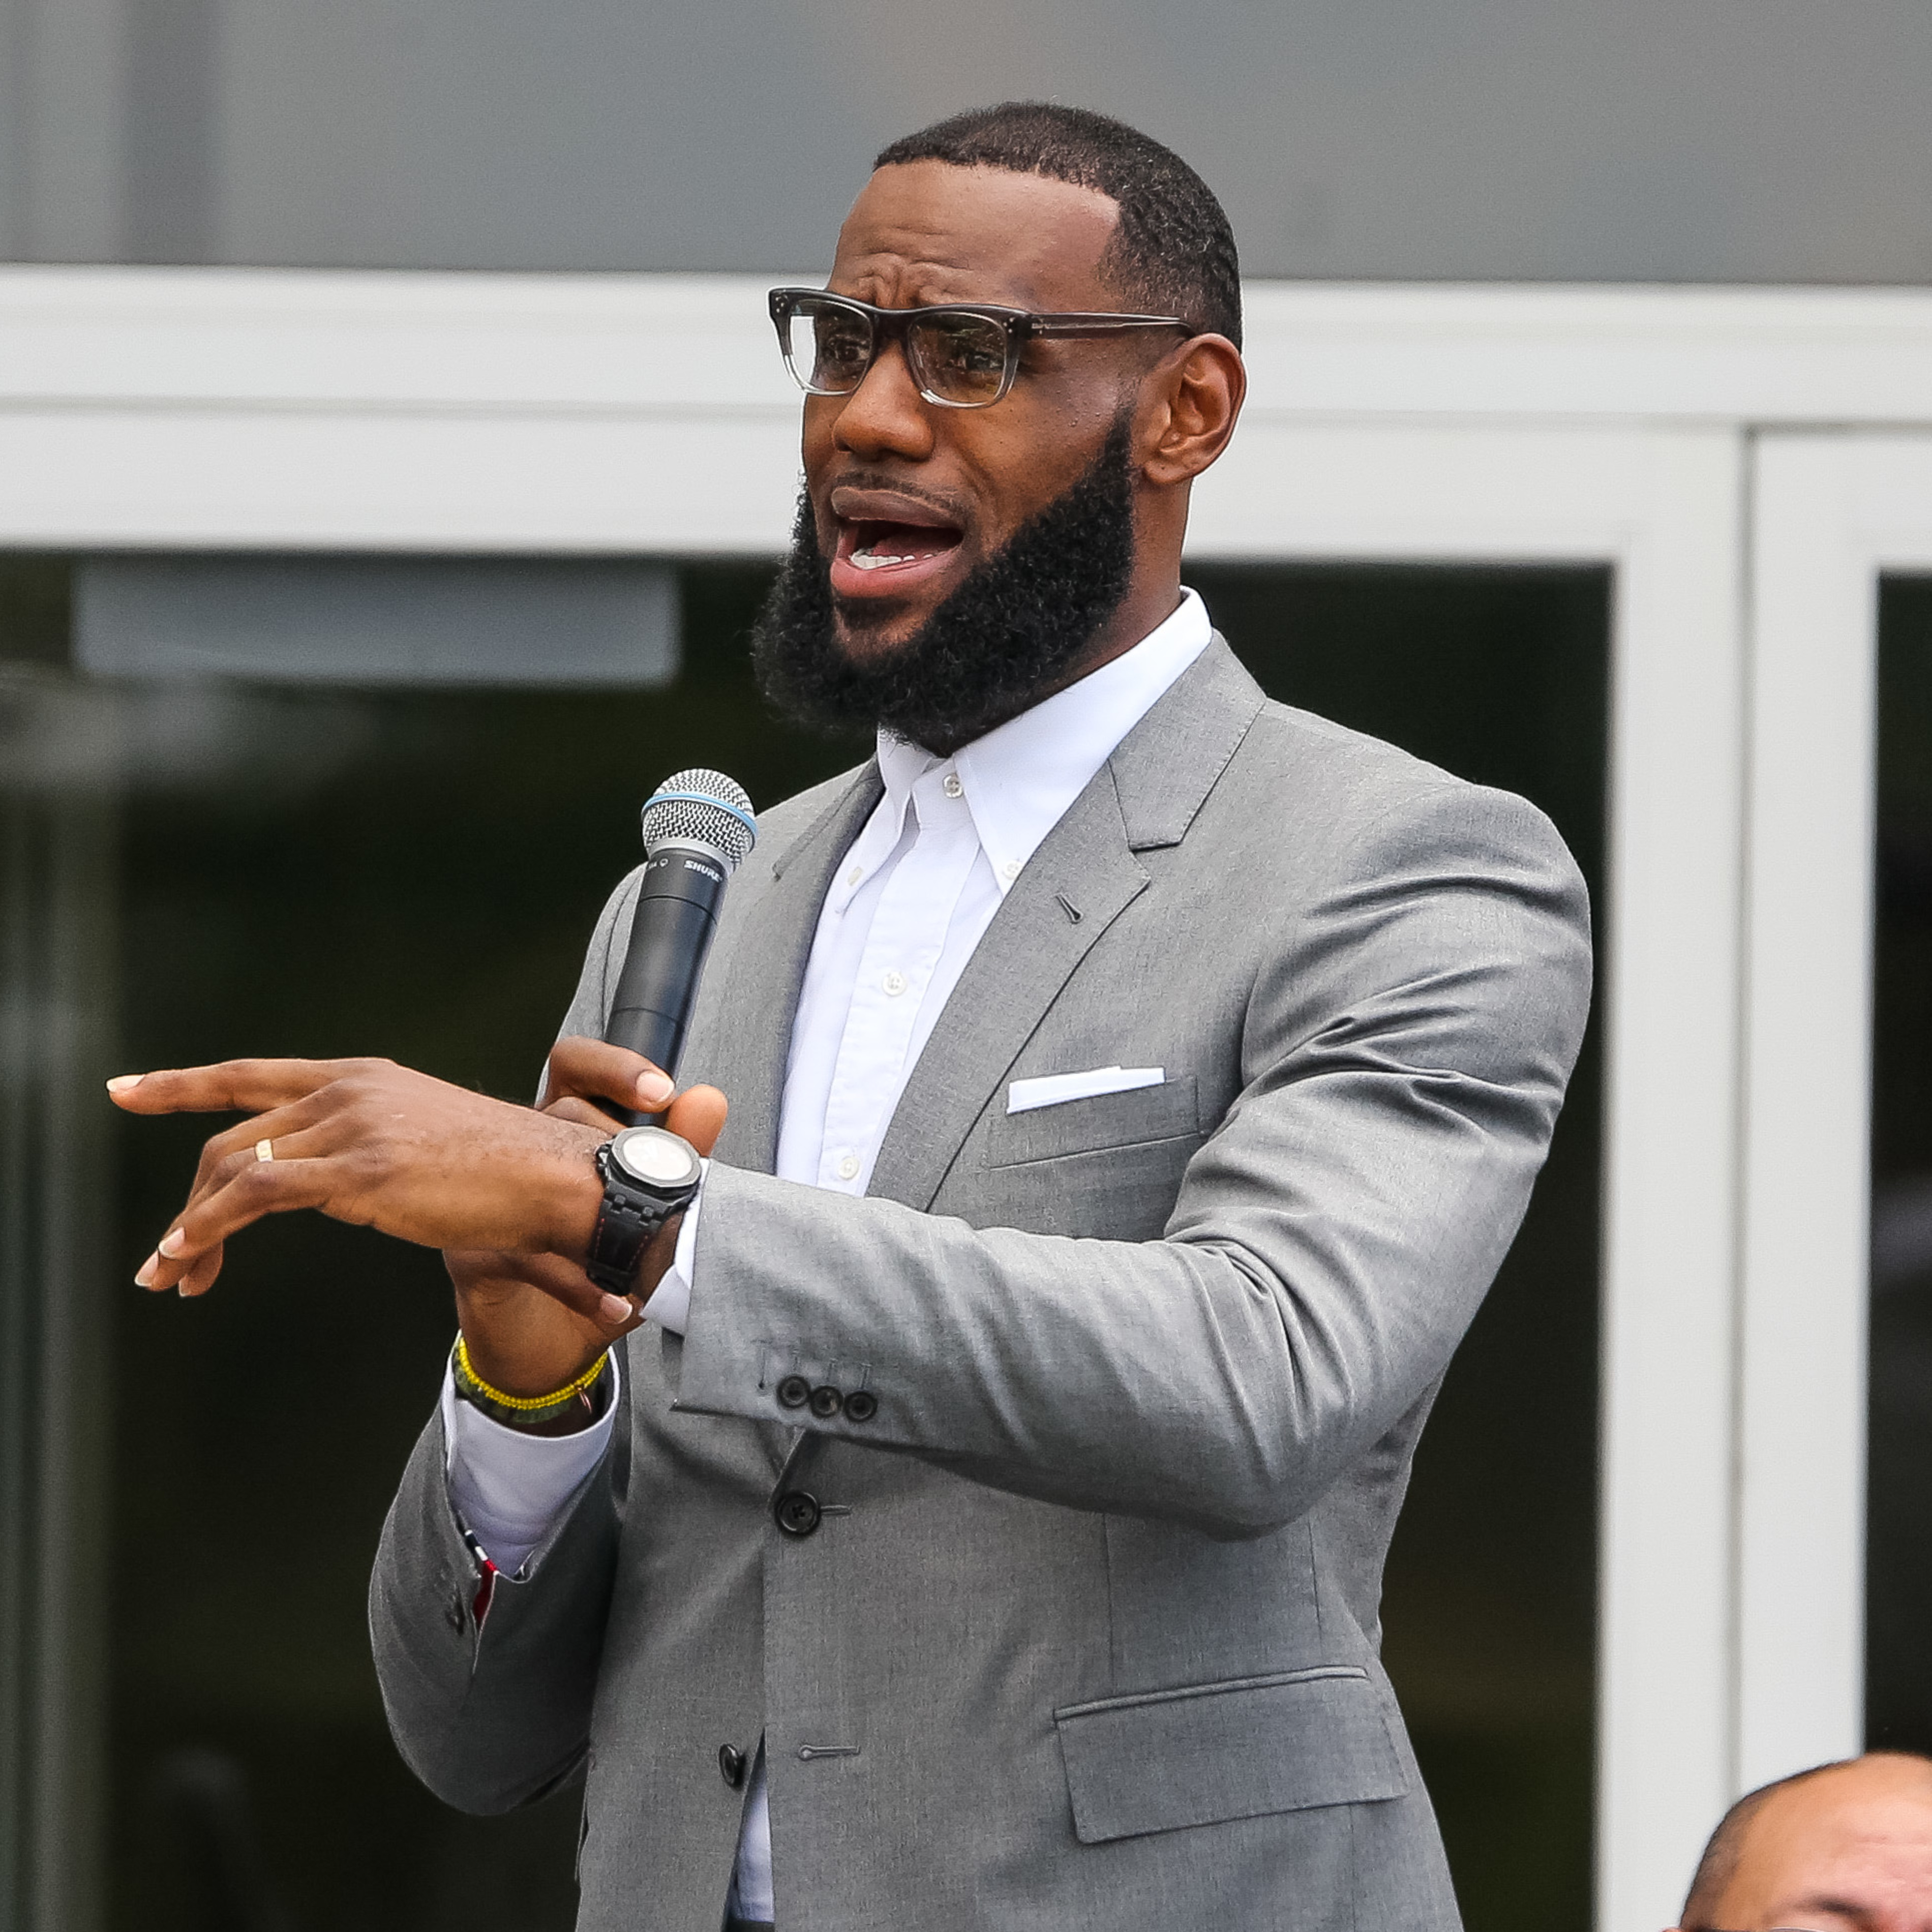 LeBron James: 'There Simply Has to Be Change' After Texas Elementary School Shoo..